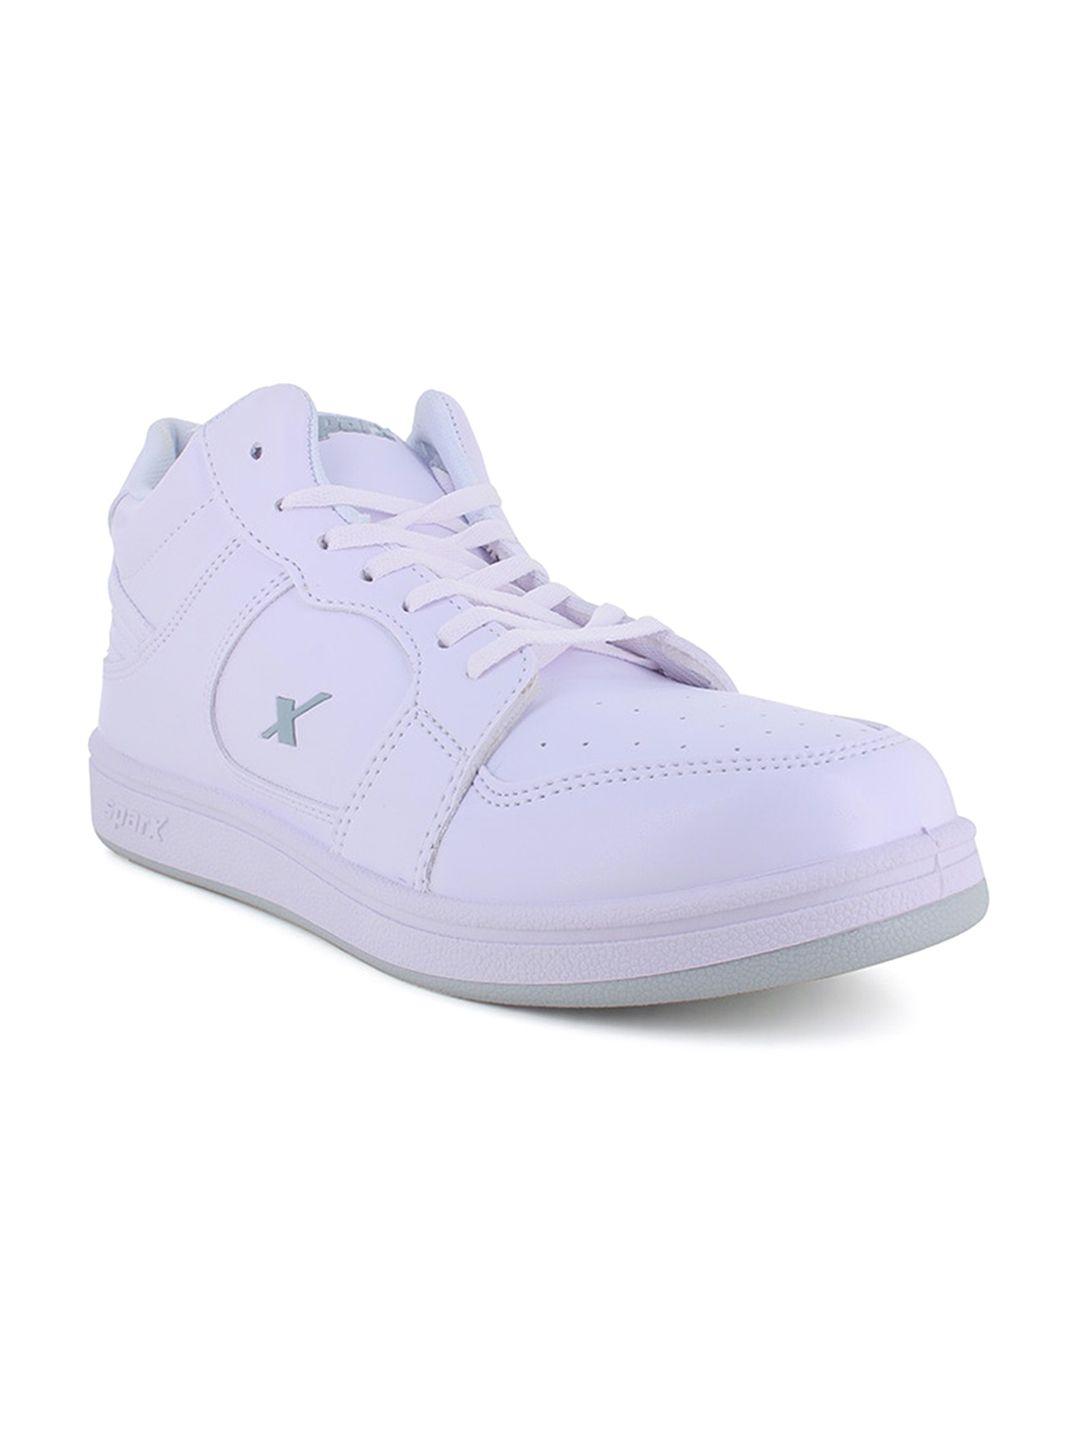 sparx men perforated lace-up sneakers